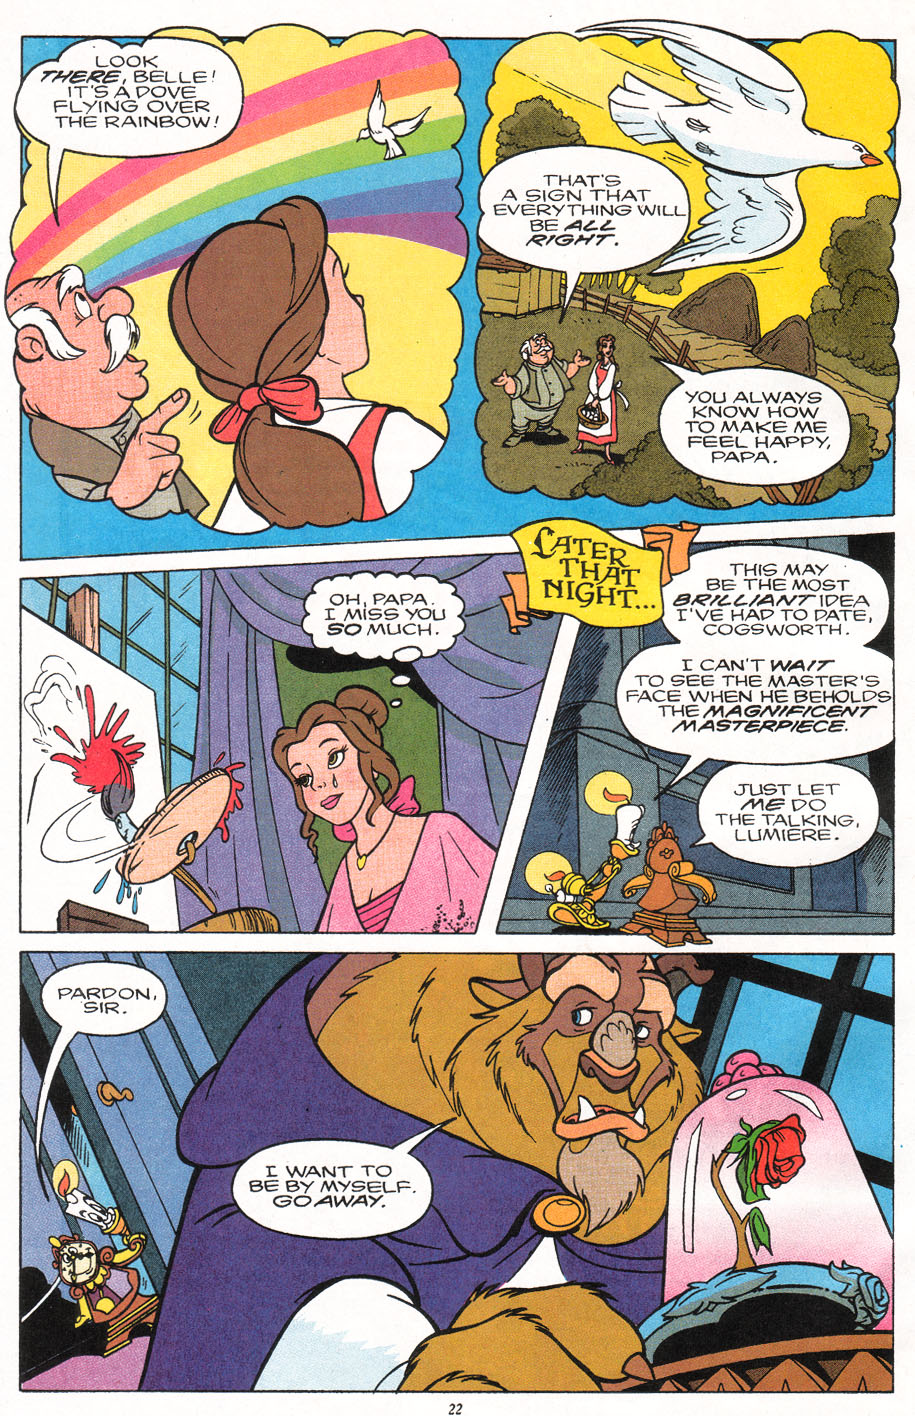 Read online Disney's Beauty and the Beast comic -  Issue #9 - 24